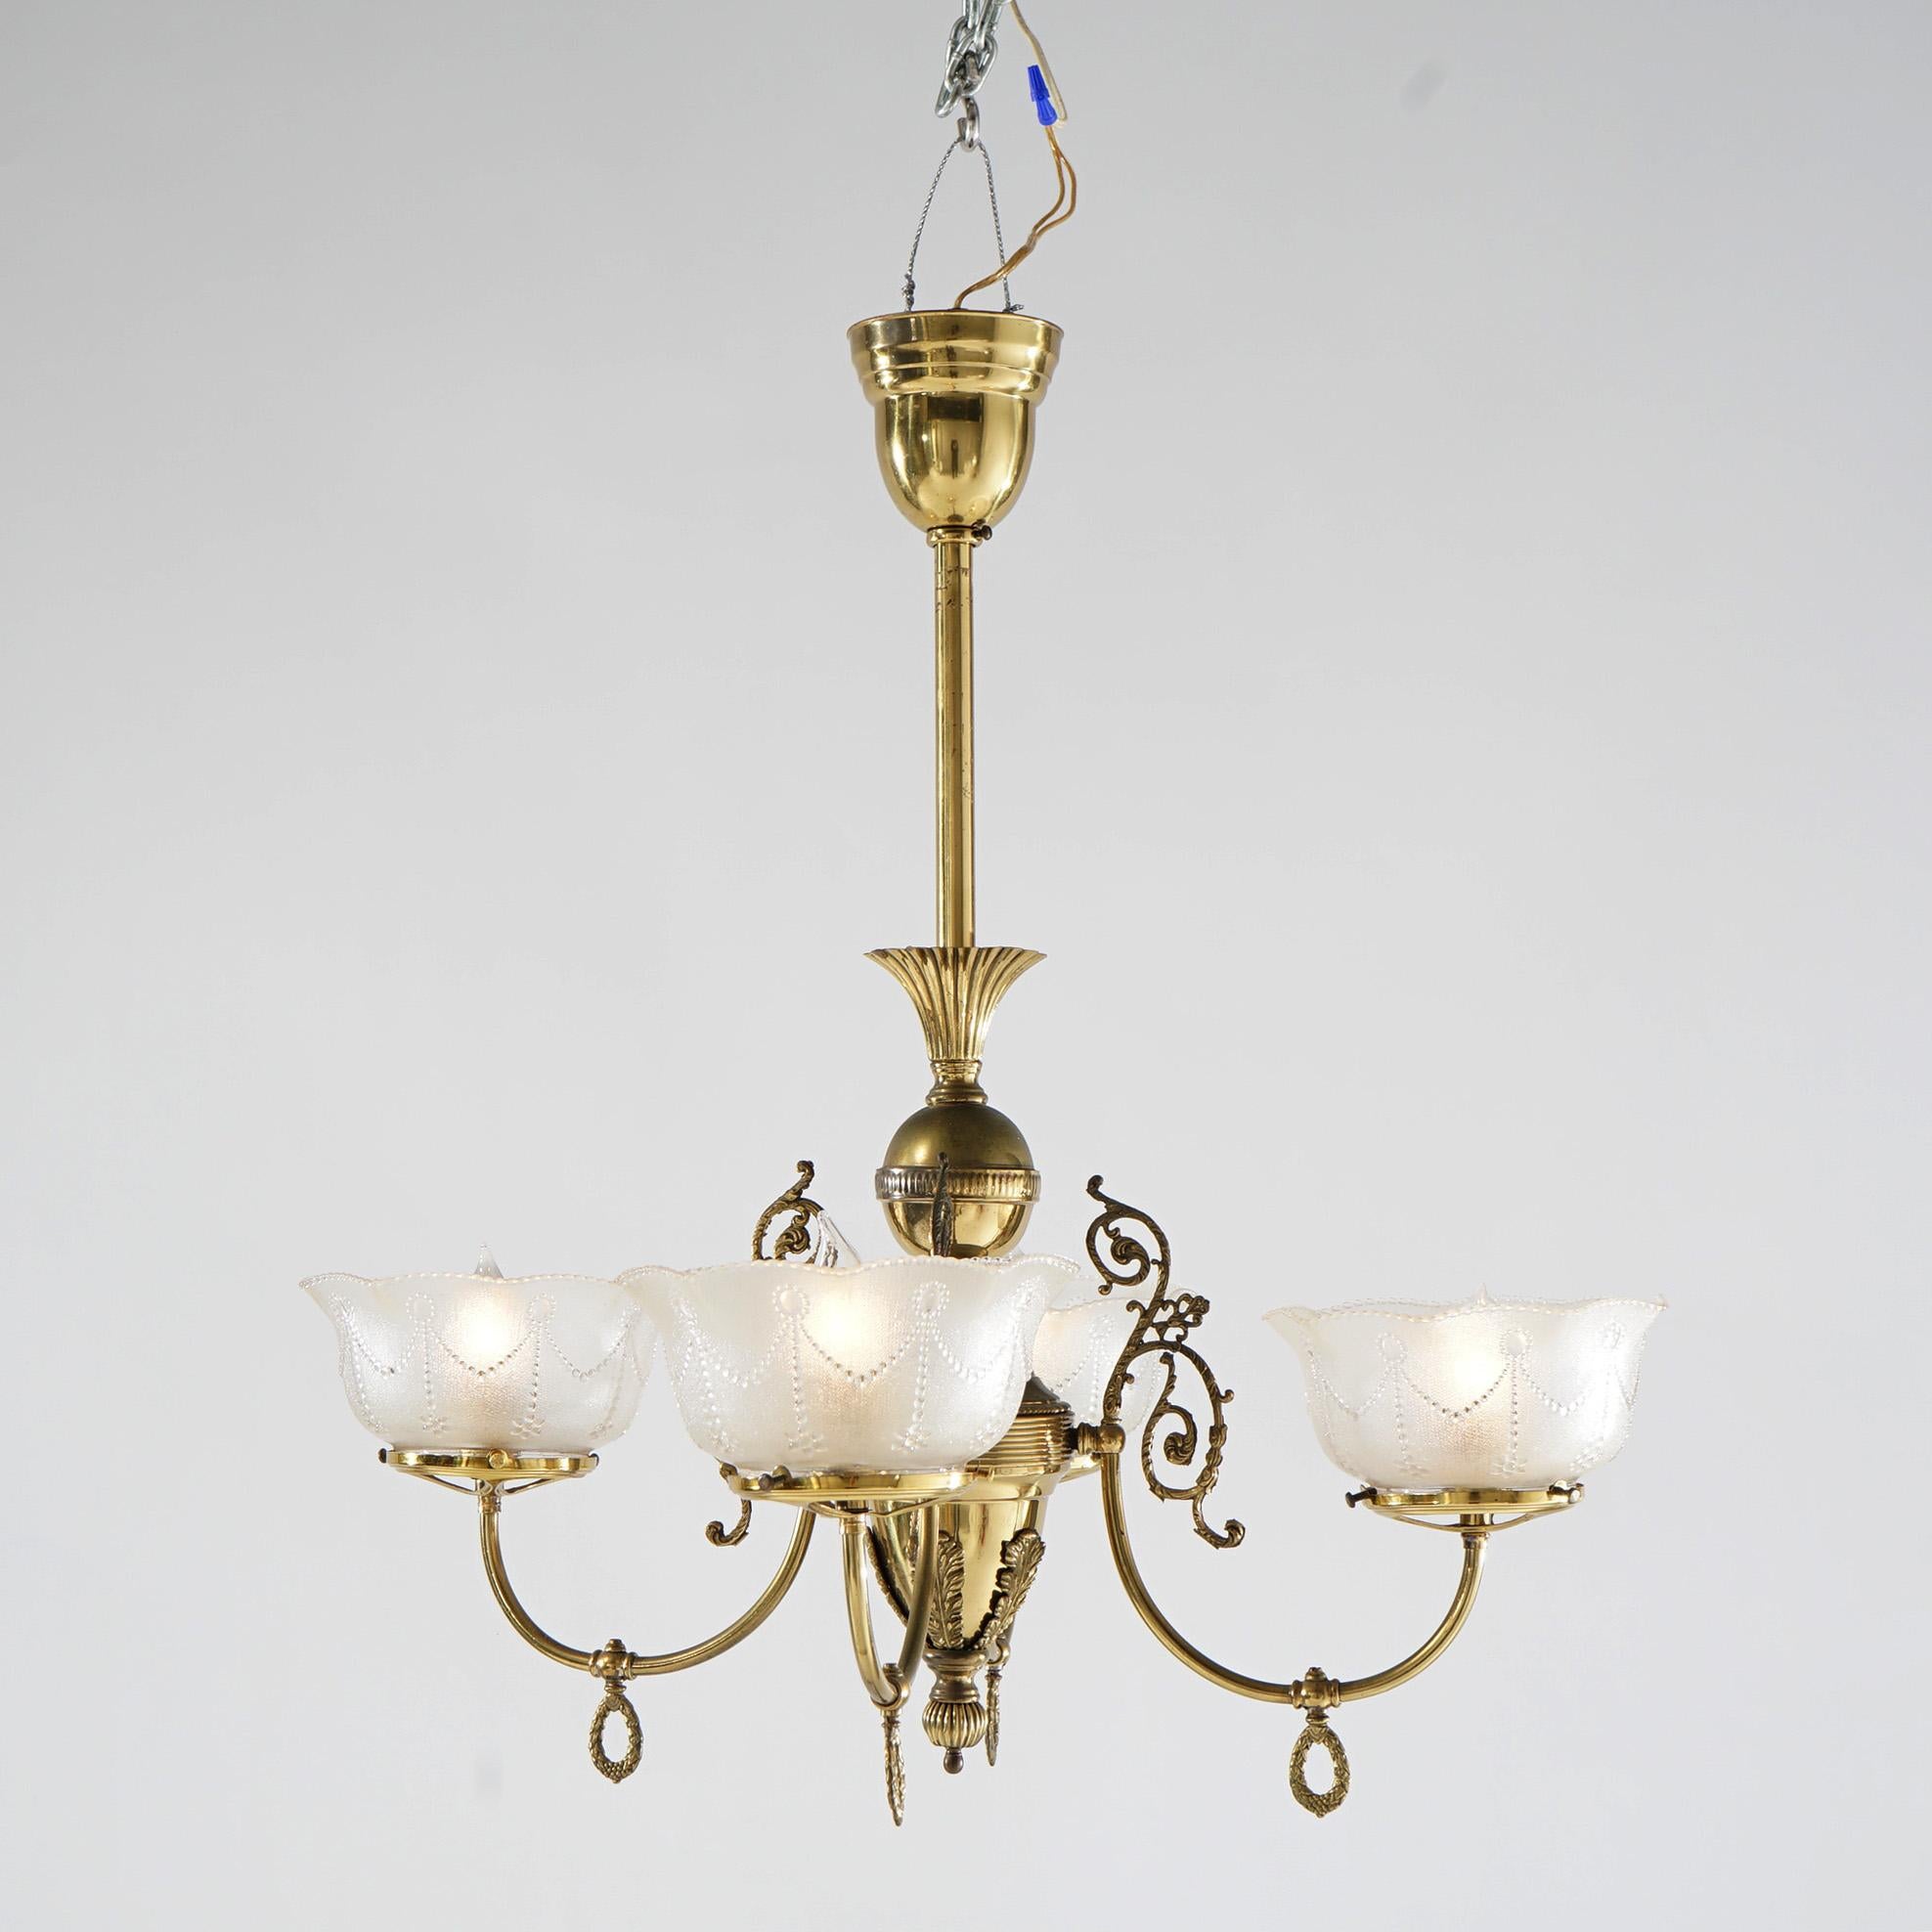 An antique gas chandelier offers brass frame in scroll and foliate form with four arms terminating in lights with glass shades, converted to electric, 19th century

Measures - 28